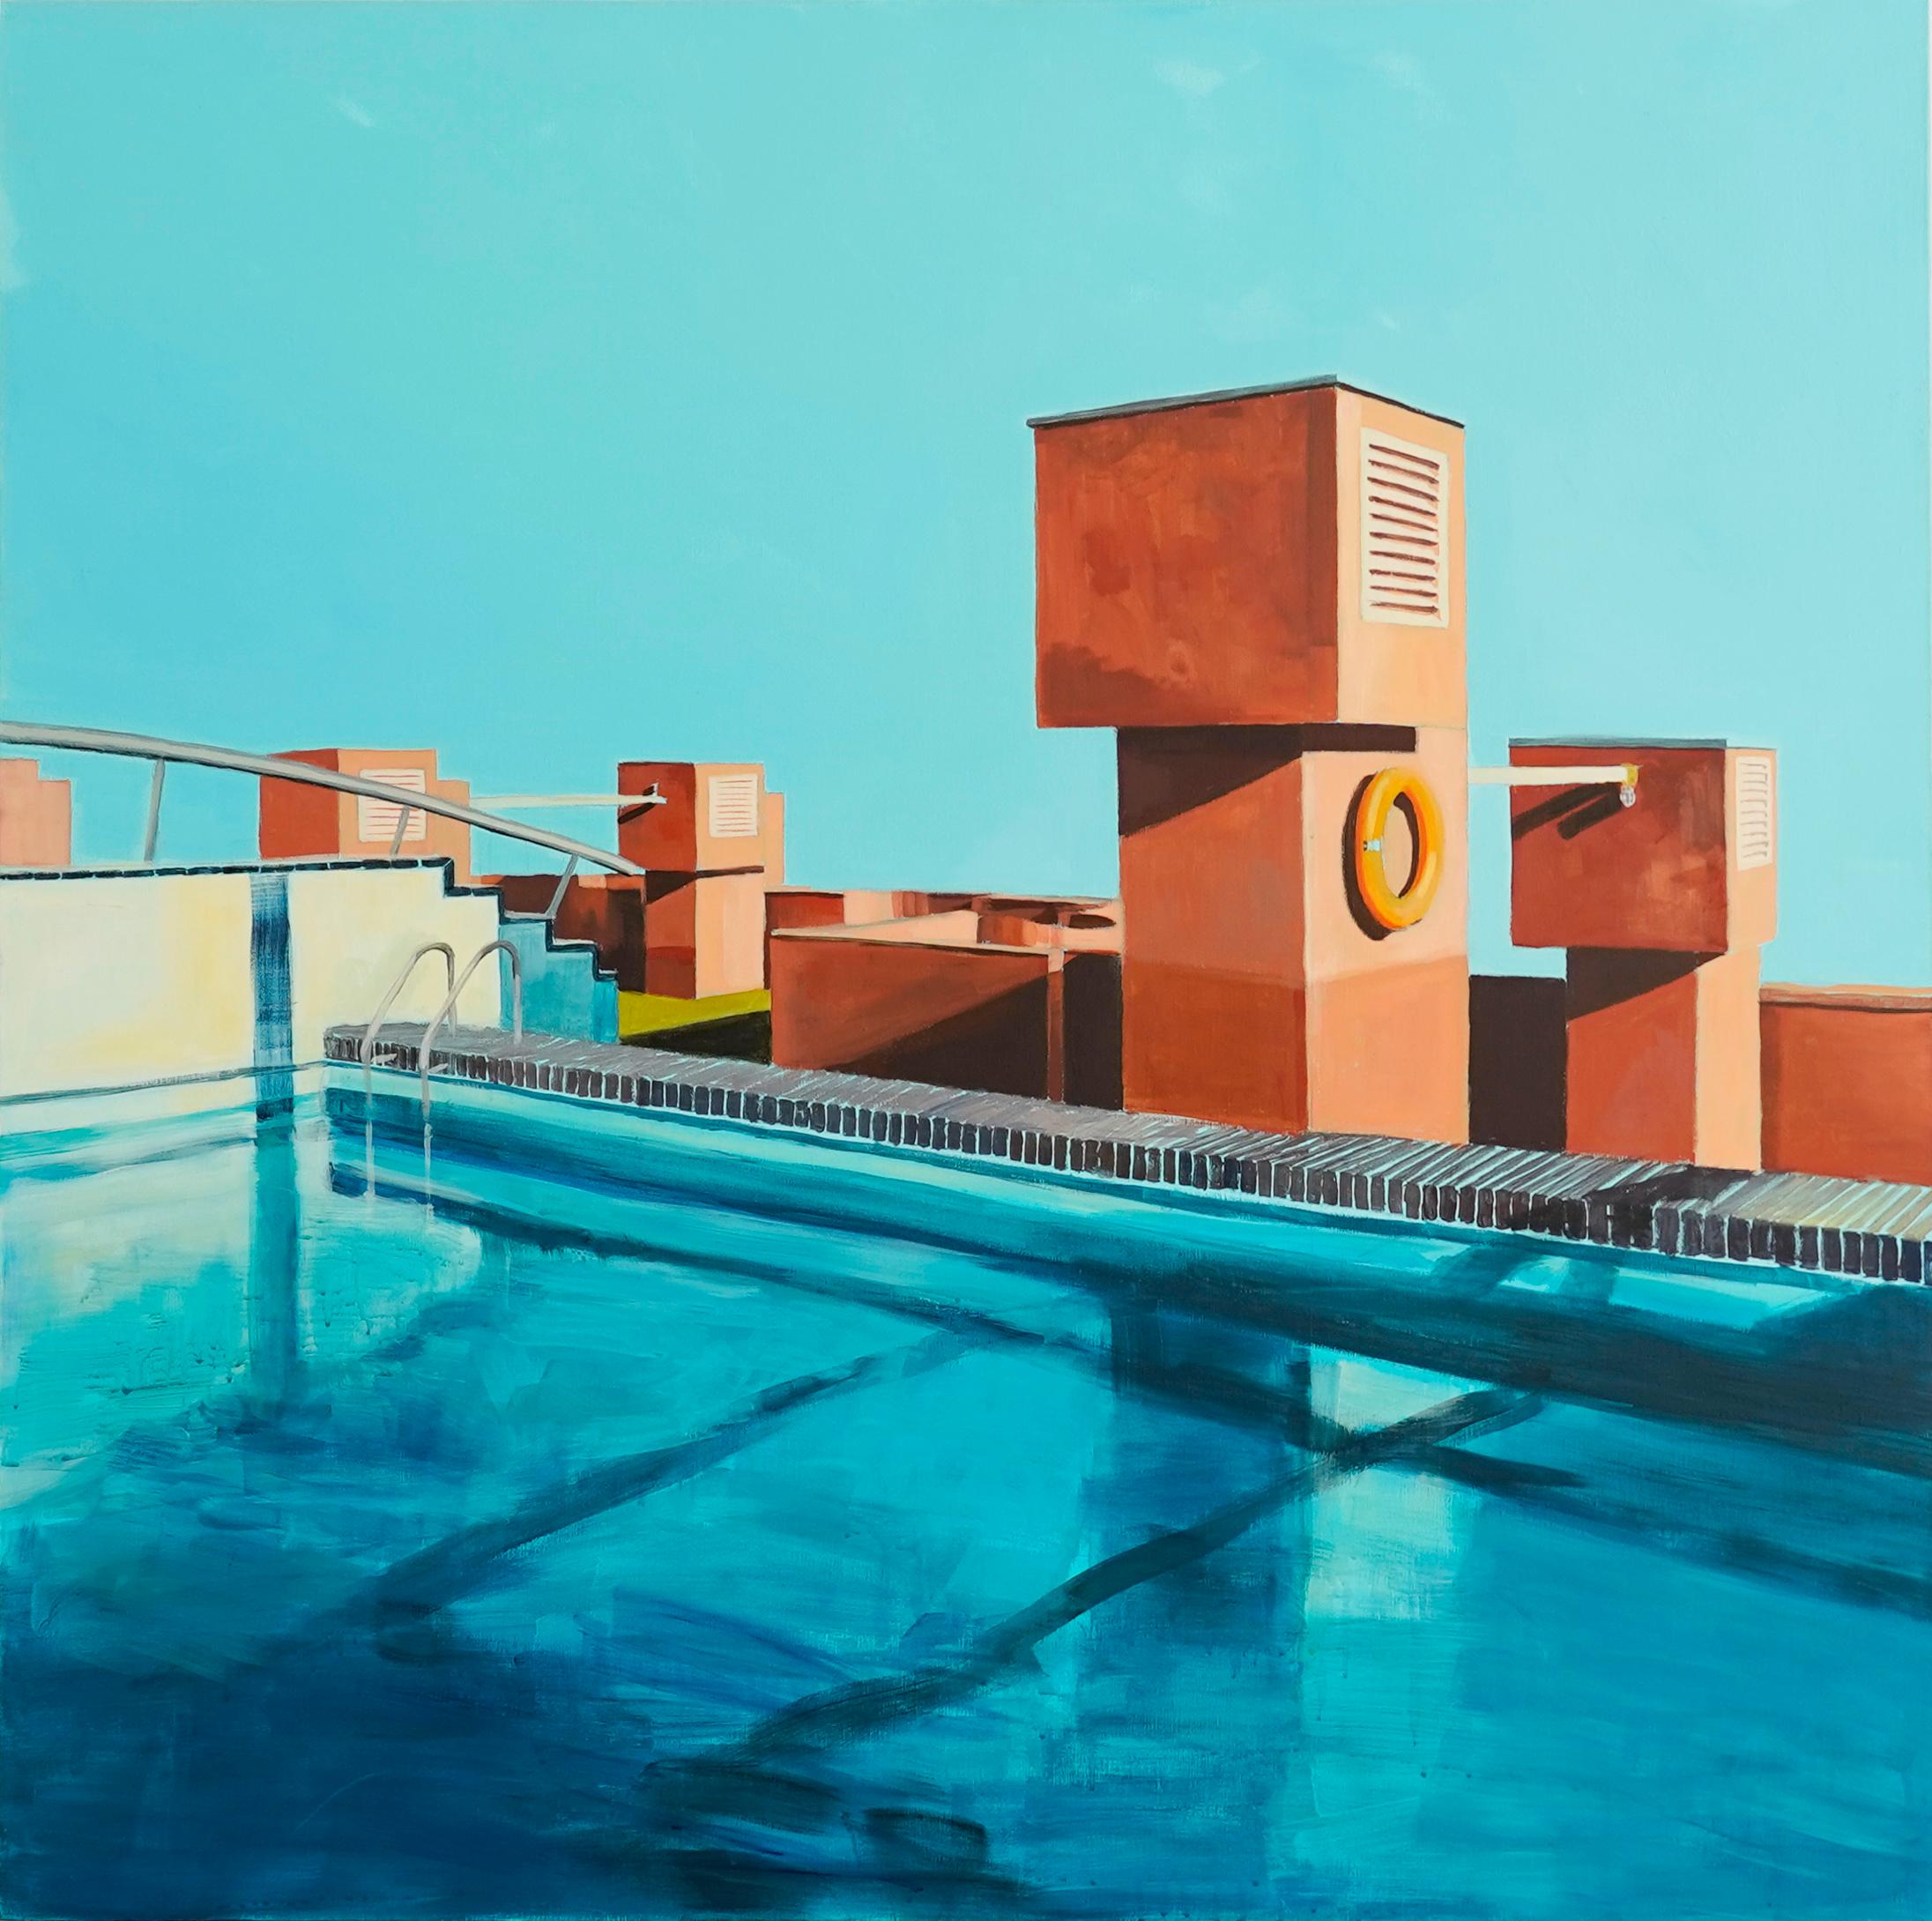 Summer in the city
Ricardo Bofill architect
Acrylic on linen
100x100 cm 

The artist, Bea Sarrias, has developed much of her work in Barcelona, where she studied Fine Arts and soon became interested in architecture and the portrayal of iconic